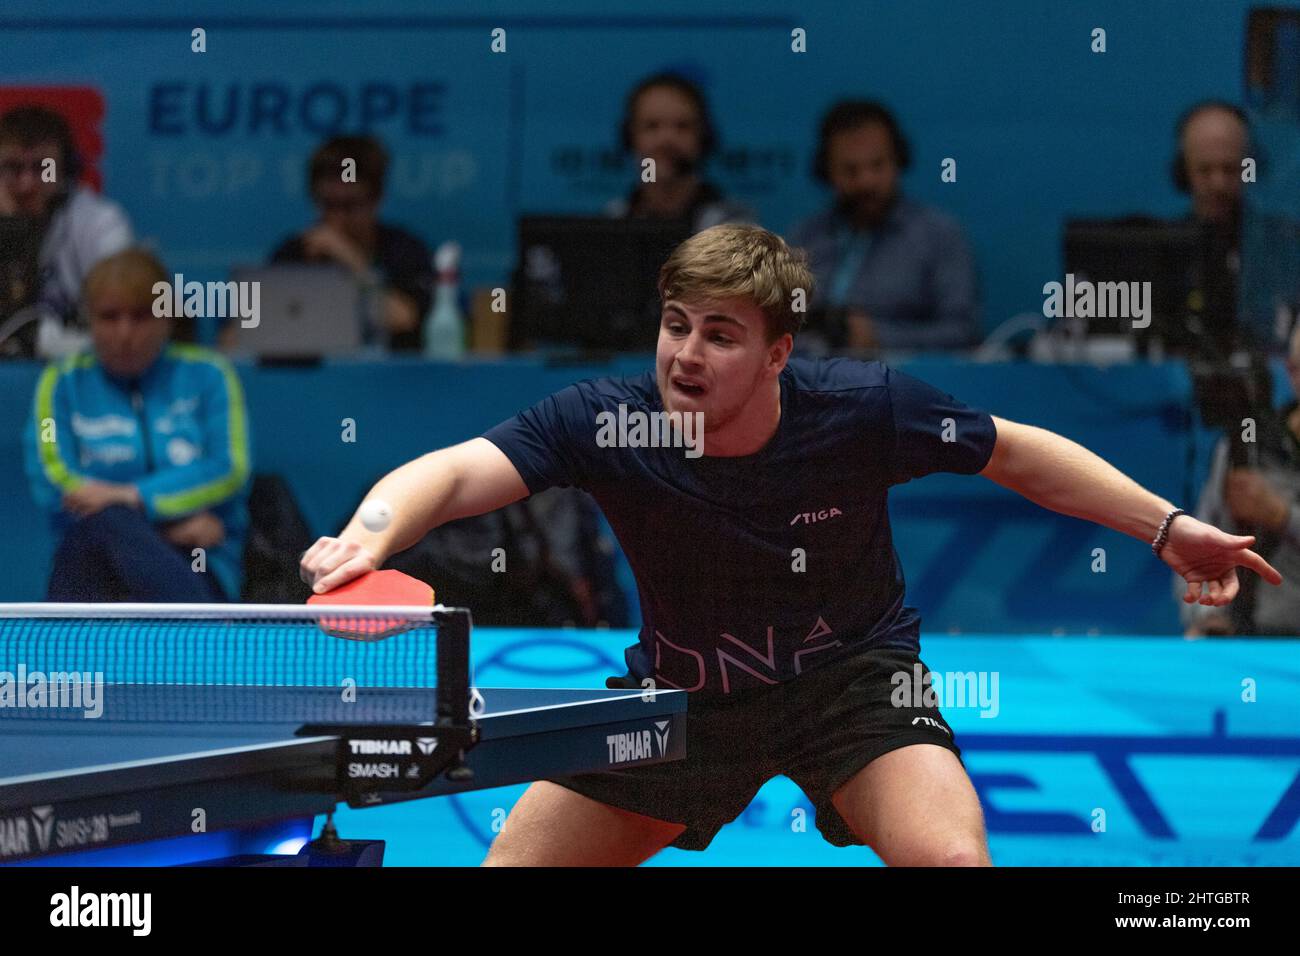 Montreux Switzerland, 02/28/2022: Truls Moregard of Sweden is in action  during the final of the men's table tennis tournament at the CCB Europe Top  16 Montreux 2022 (Photo by Eric Dubost /